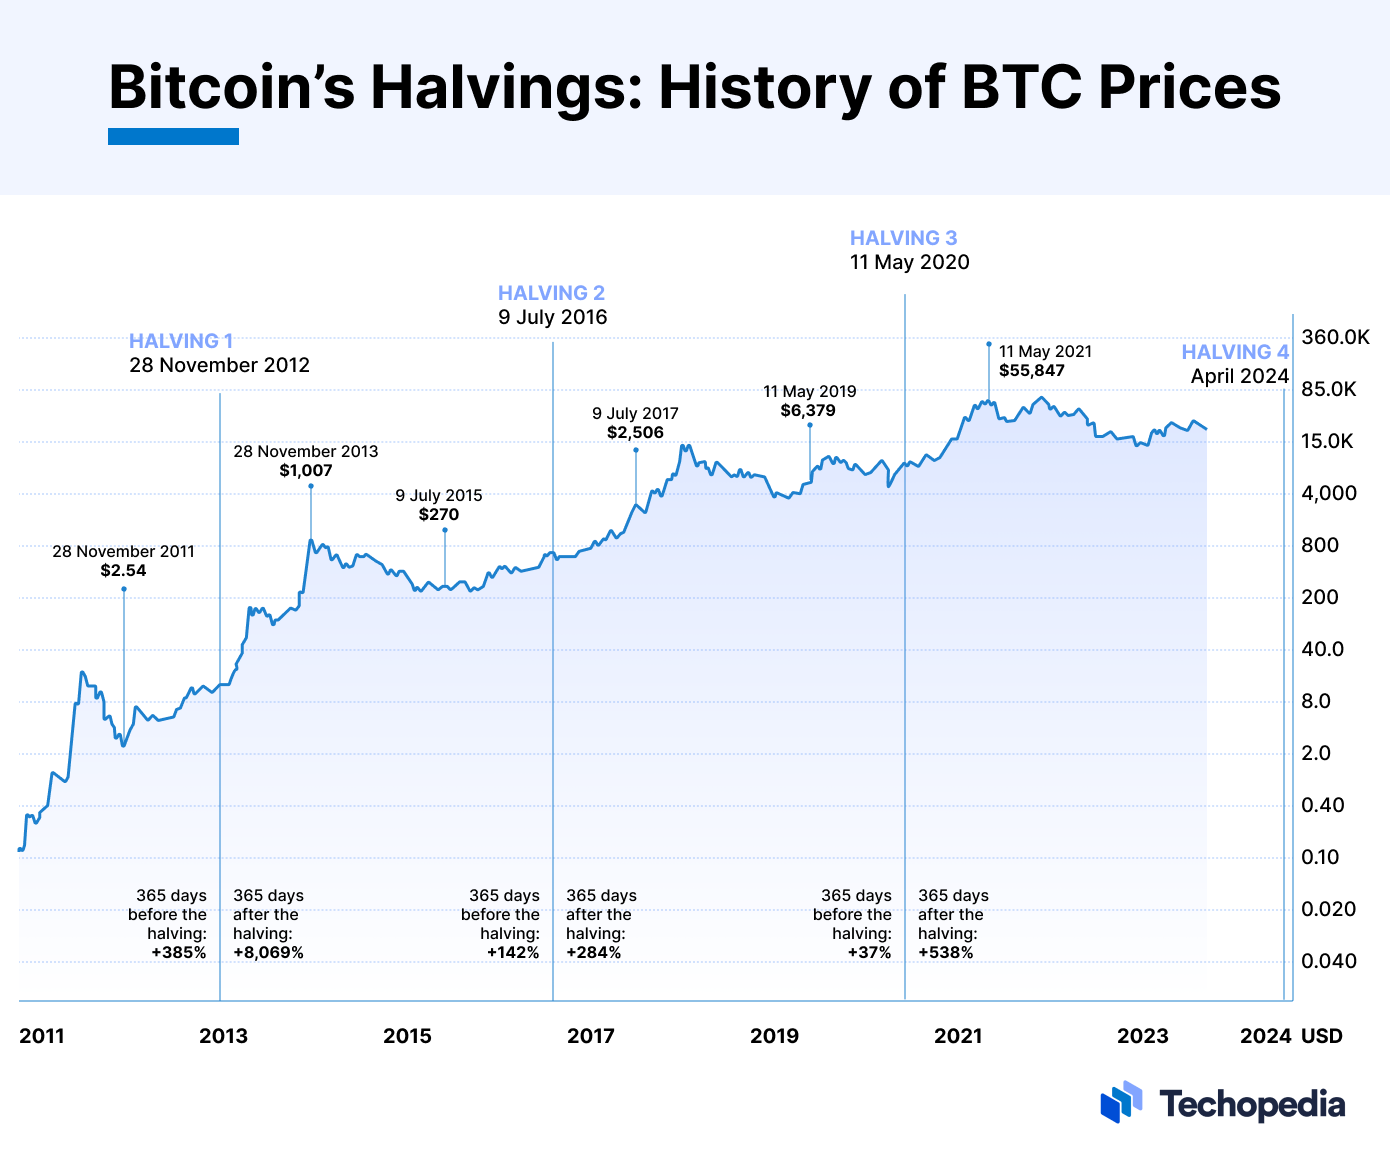 Bitcoin Halvings and BTC prices